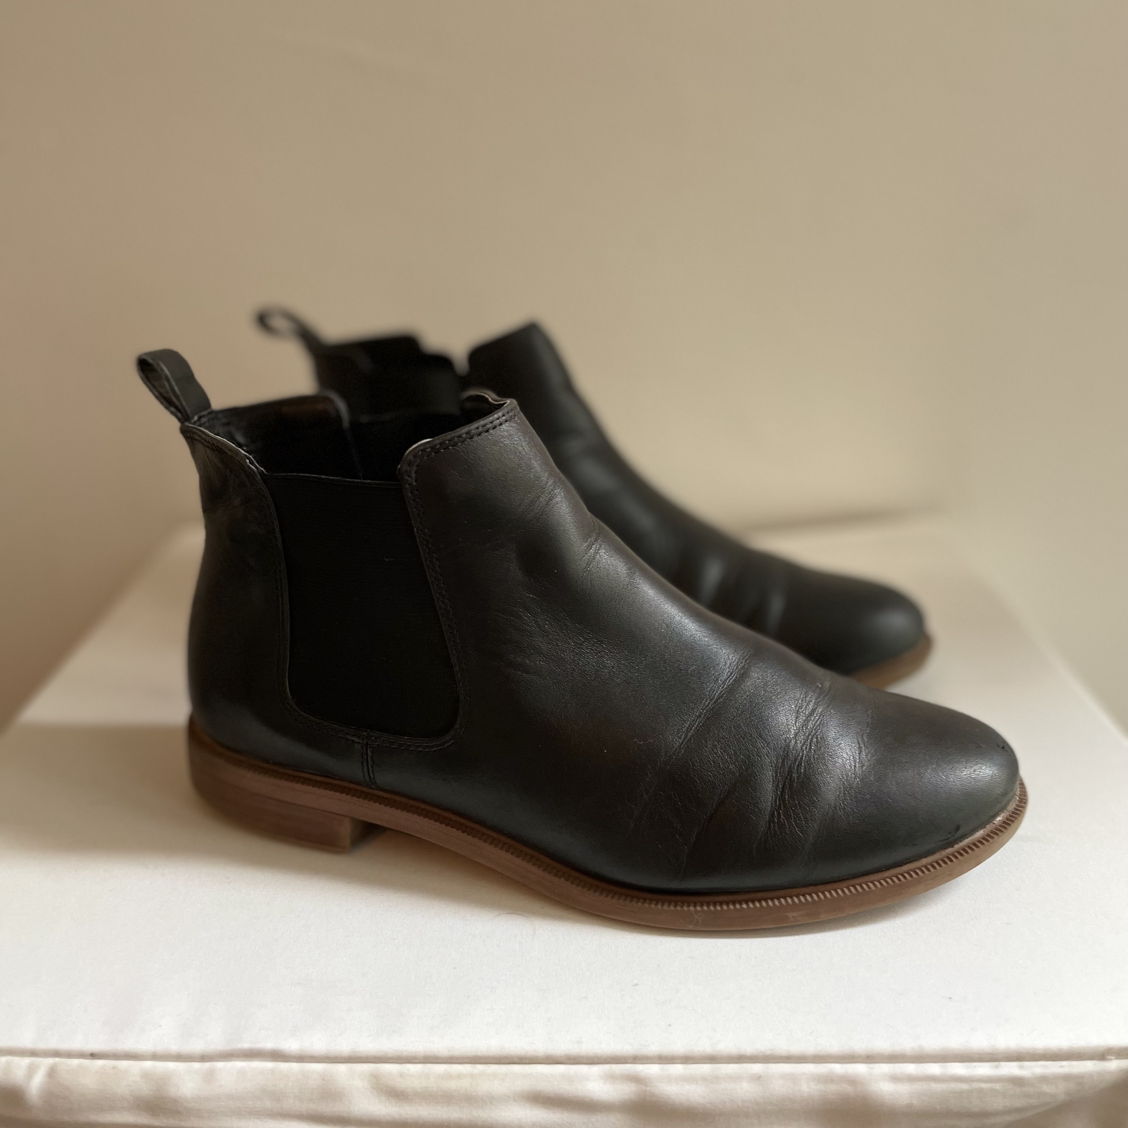 Clanks leather ankle boot